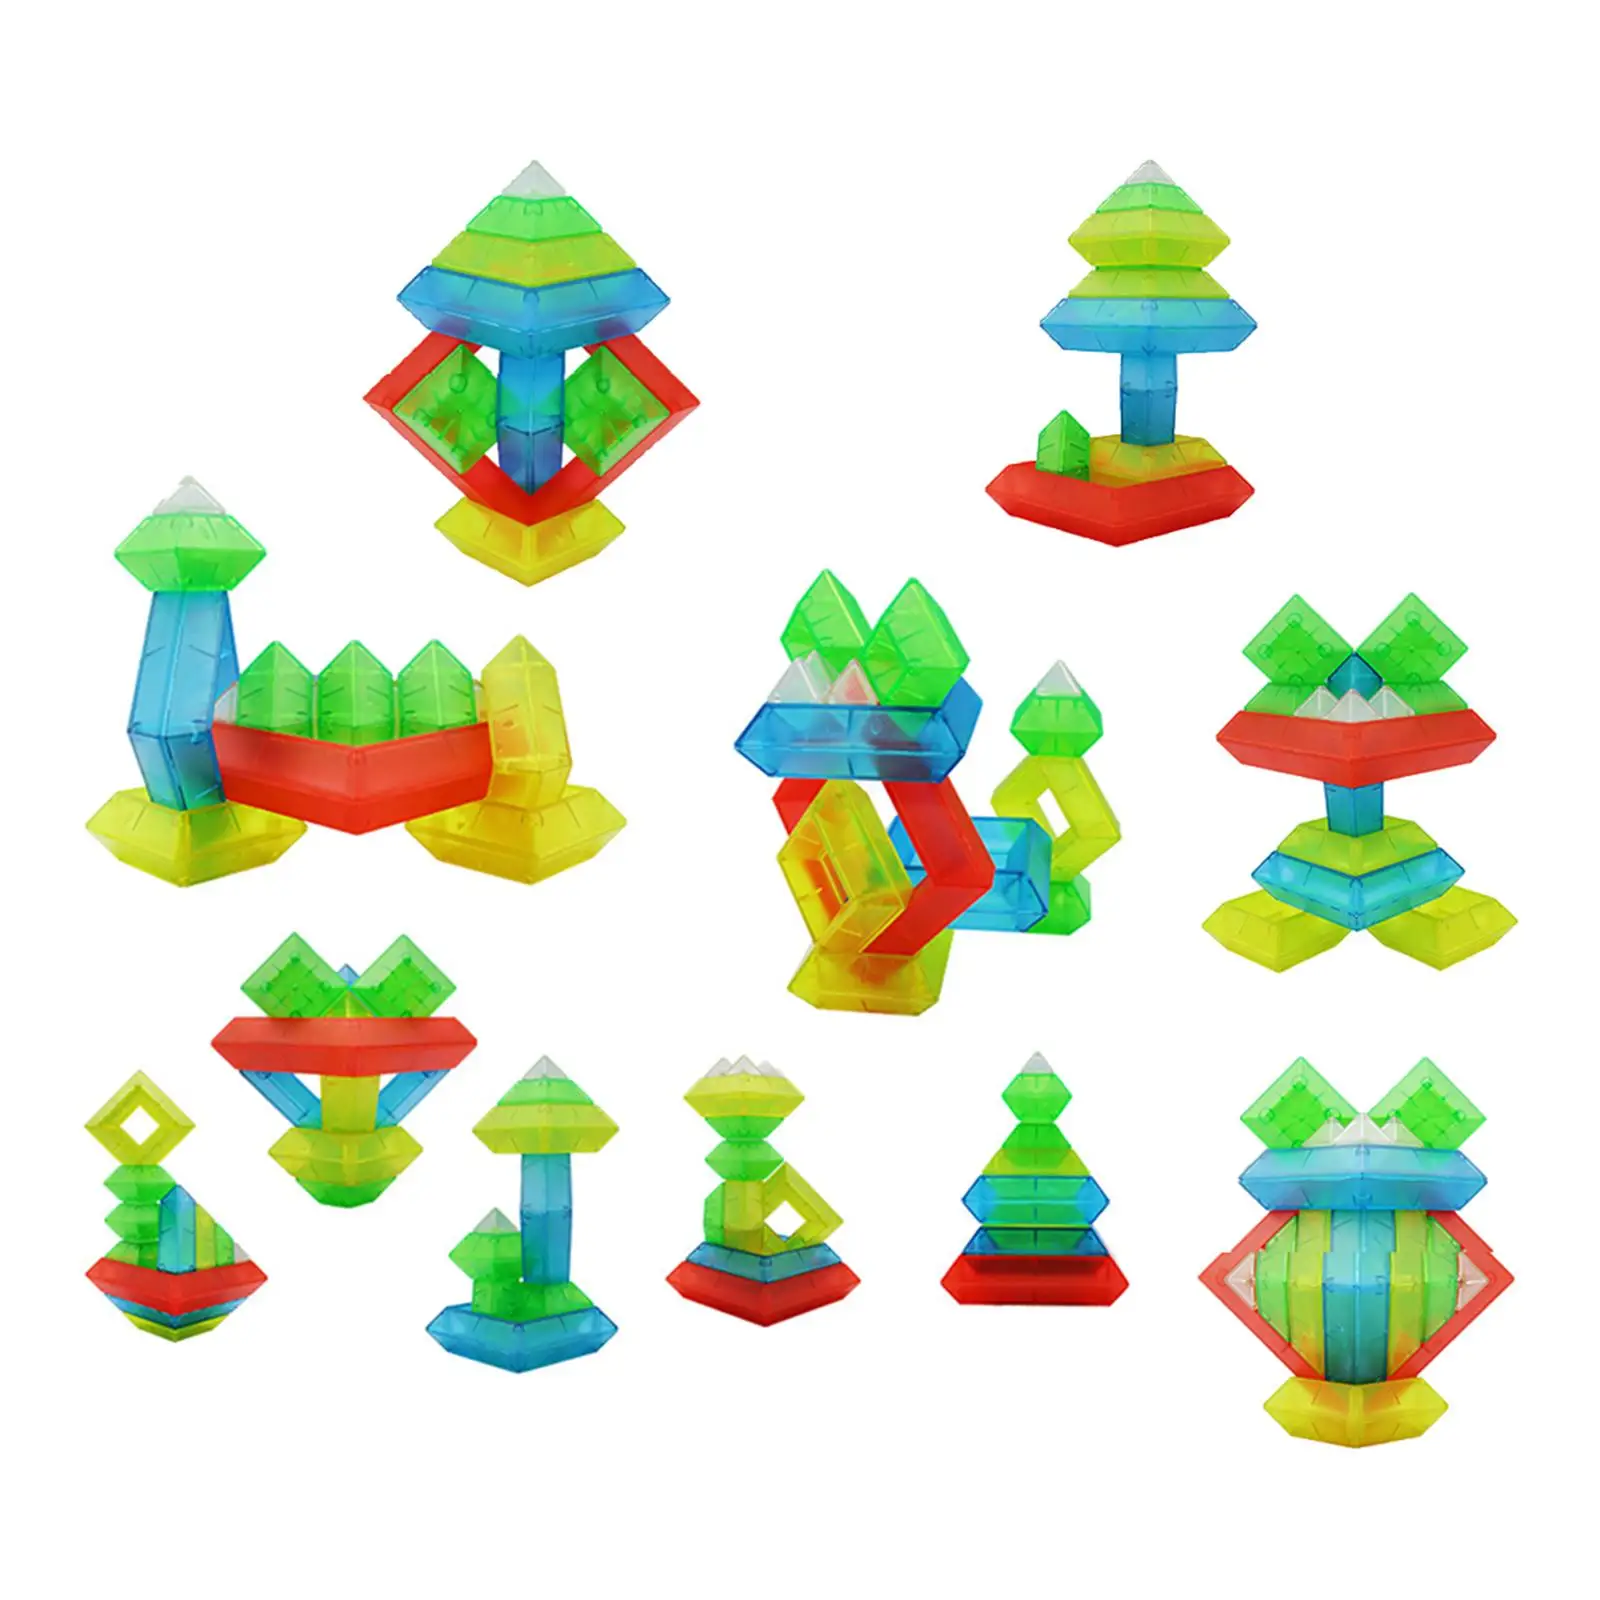 Educational Toys Stacking Imagination Puzzles Creative Ability Fun for Children